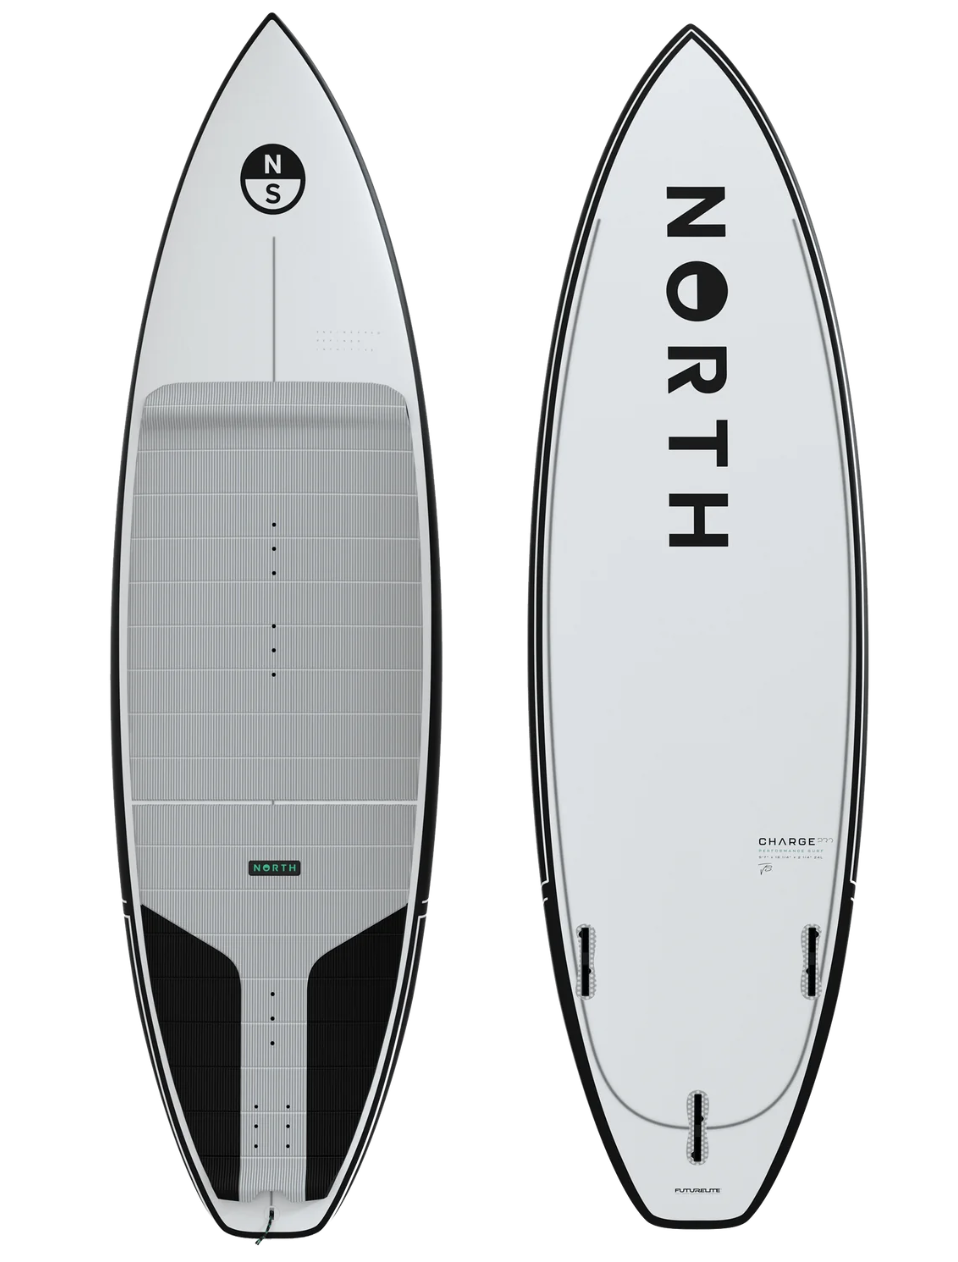 North Charger Kite Surfboard